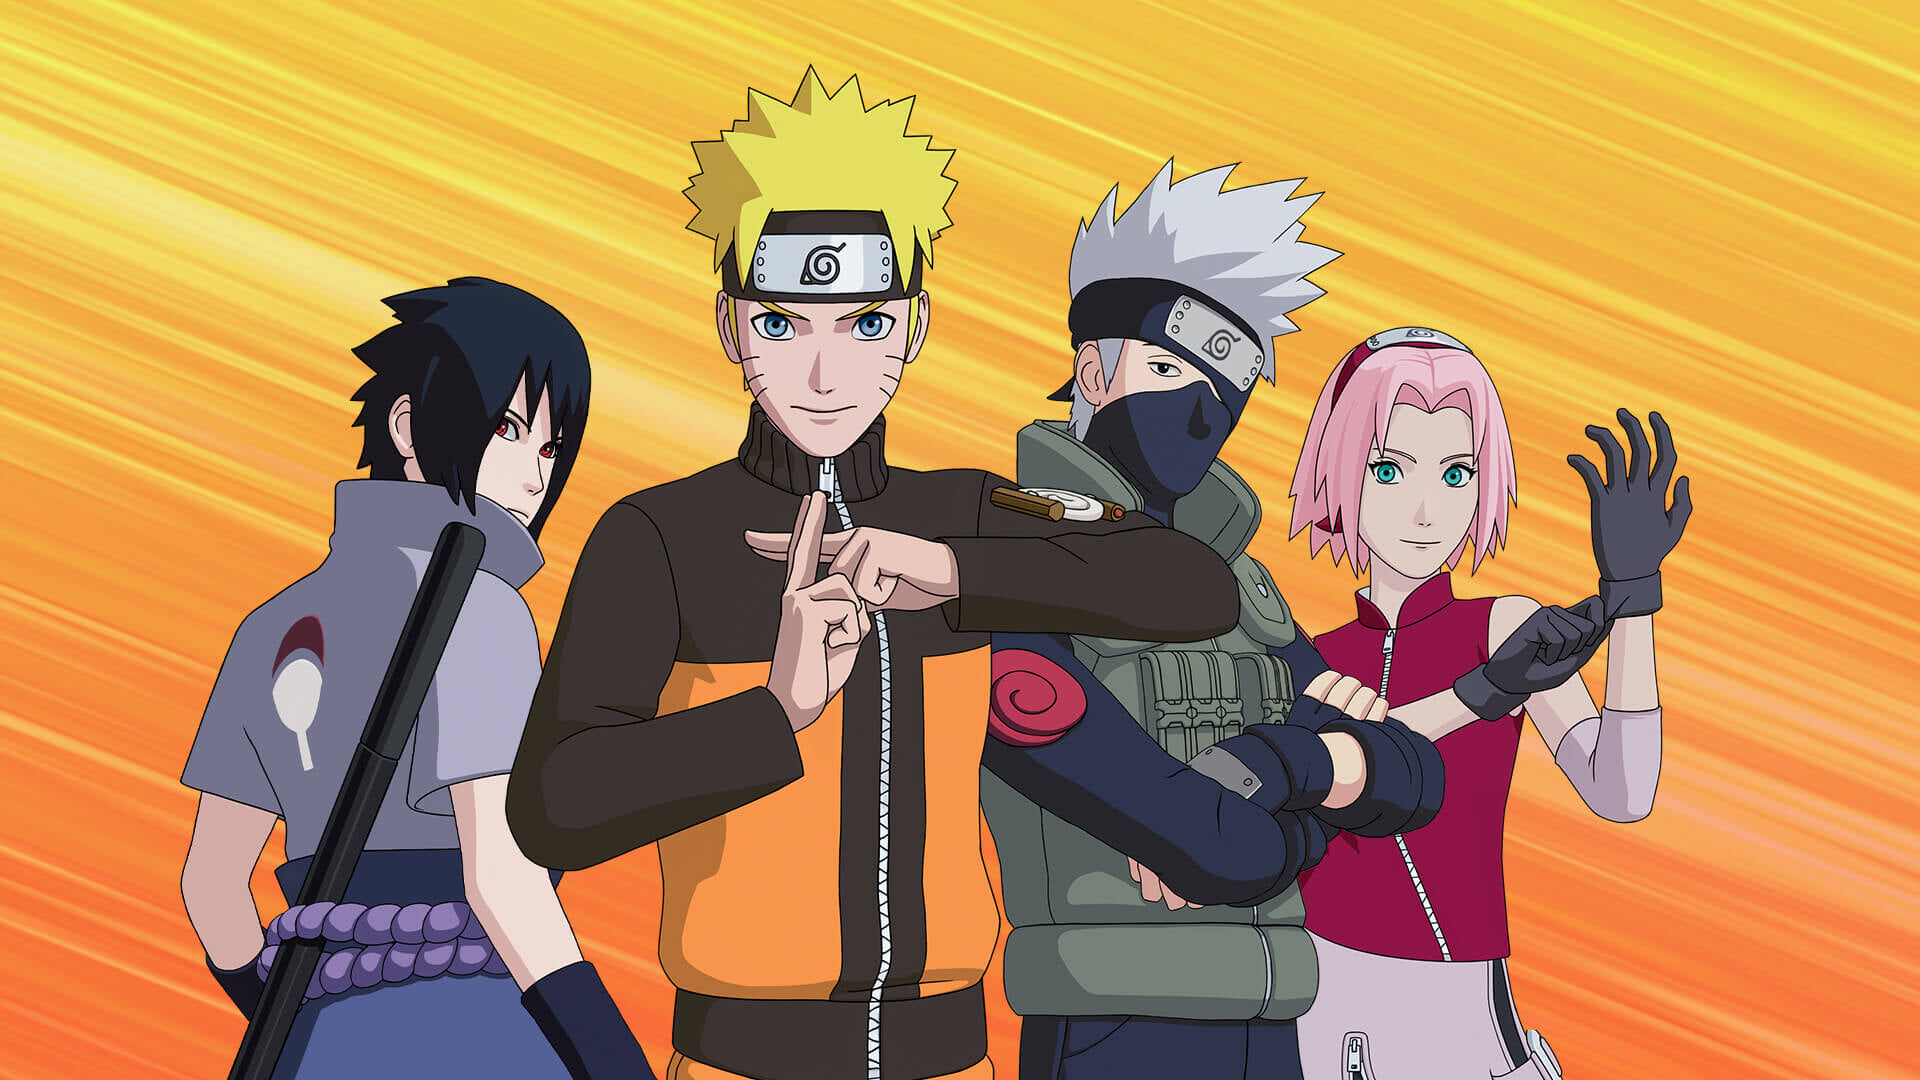 Another crossover for "Naruto" has started in Fortnite